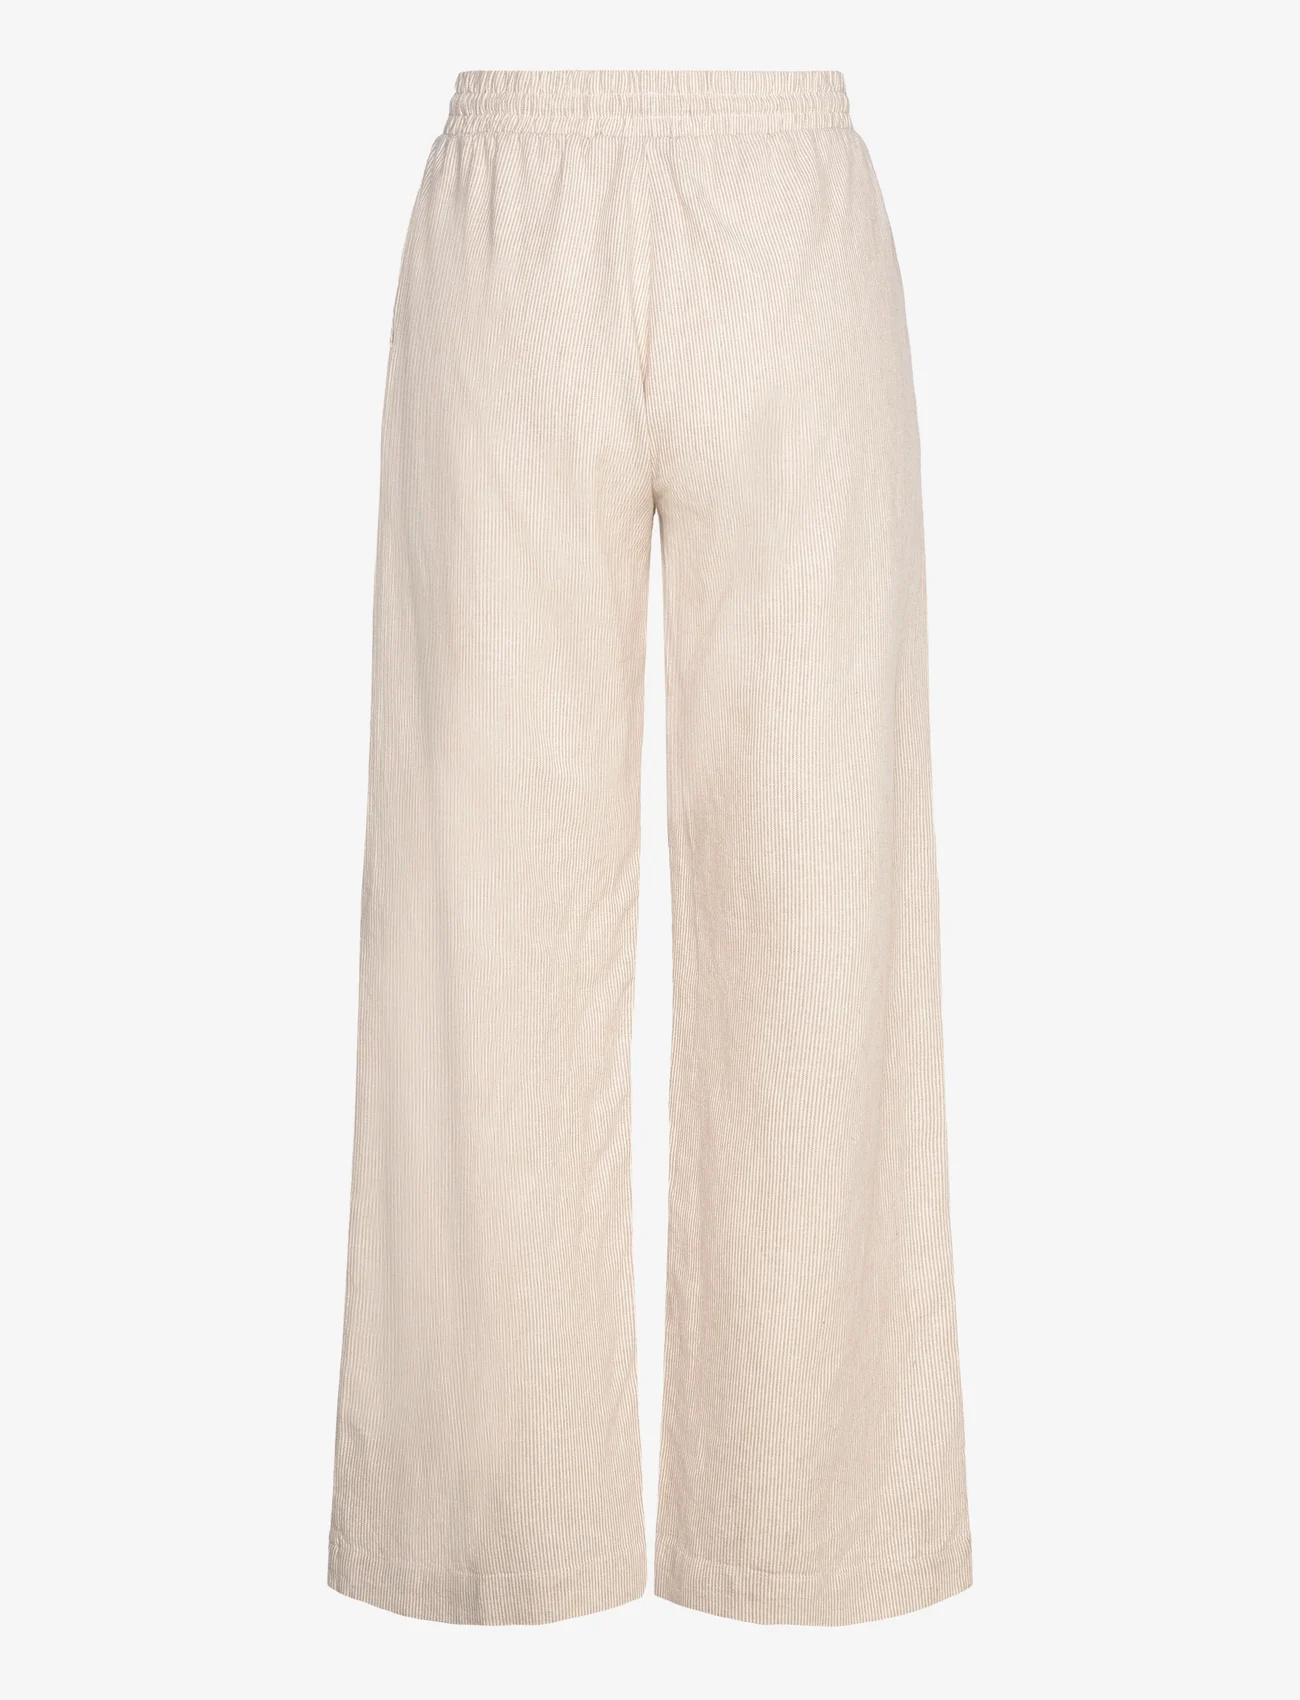 FREE/QUENT - FQLAVA-PANT - leinenhosen - simply taupe w. off-white - 1